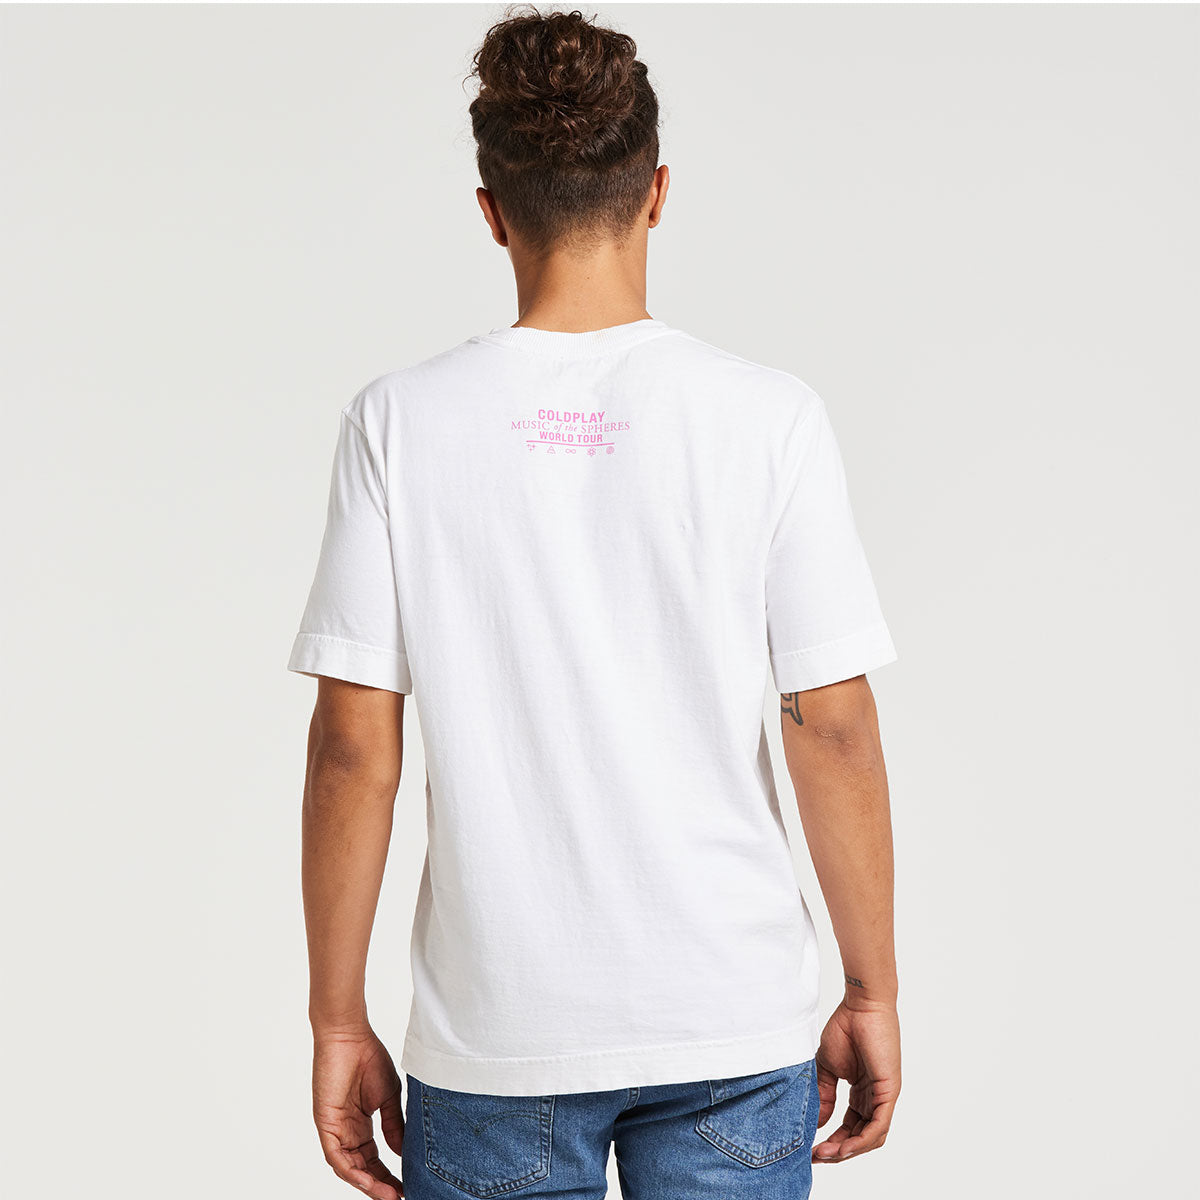 Everyone Is An Alien Somewhere - White Tee